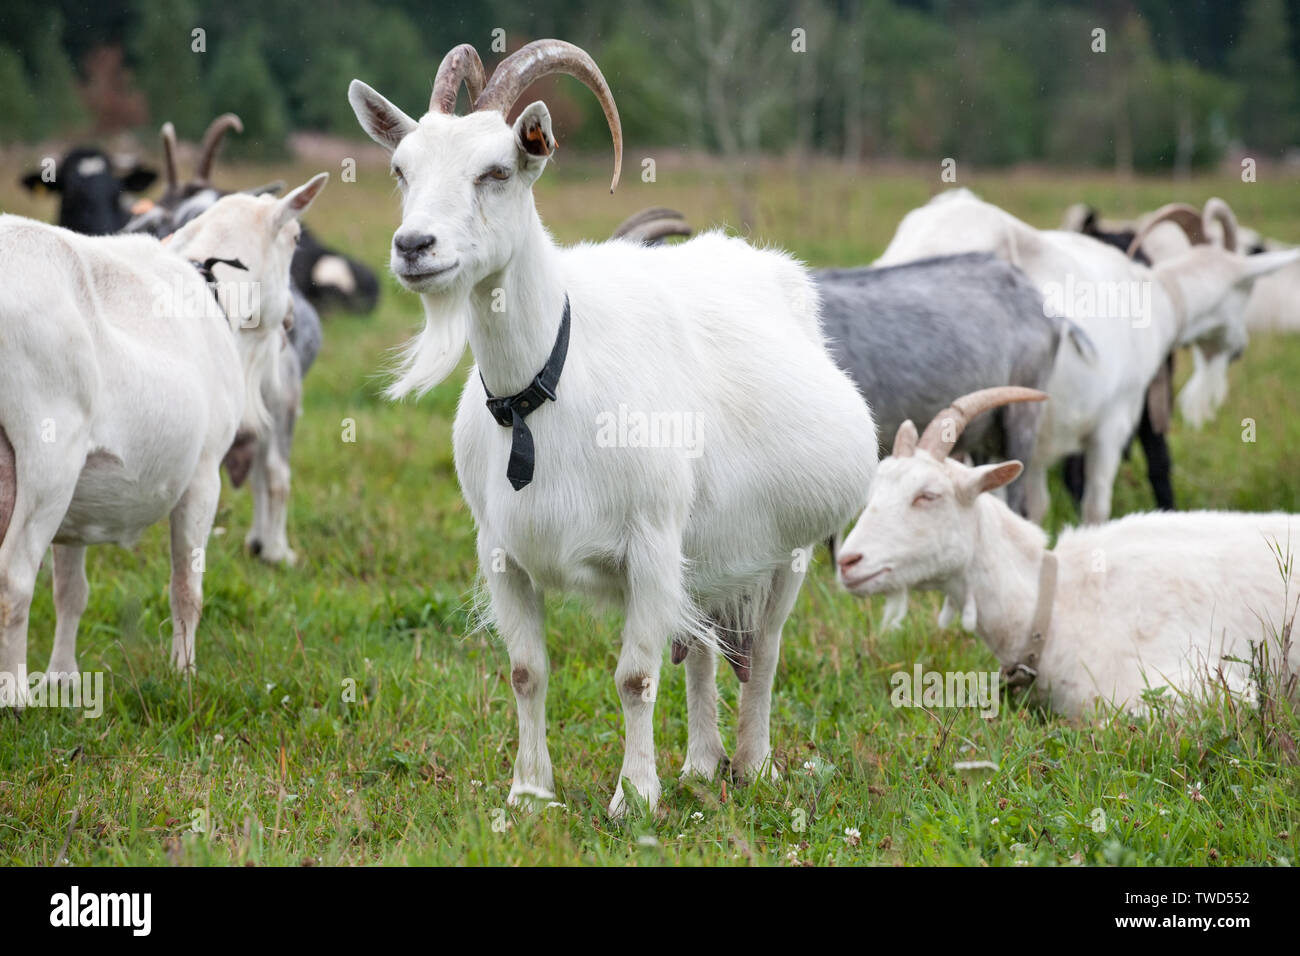 white goat standing on pasture outdoor background full-size view Stock Photo